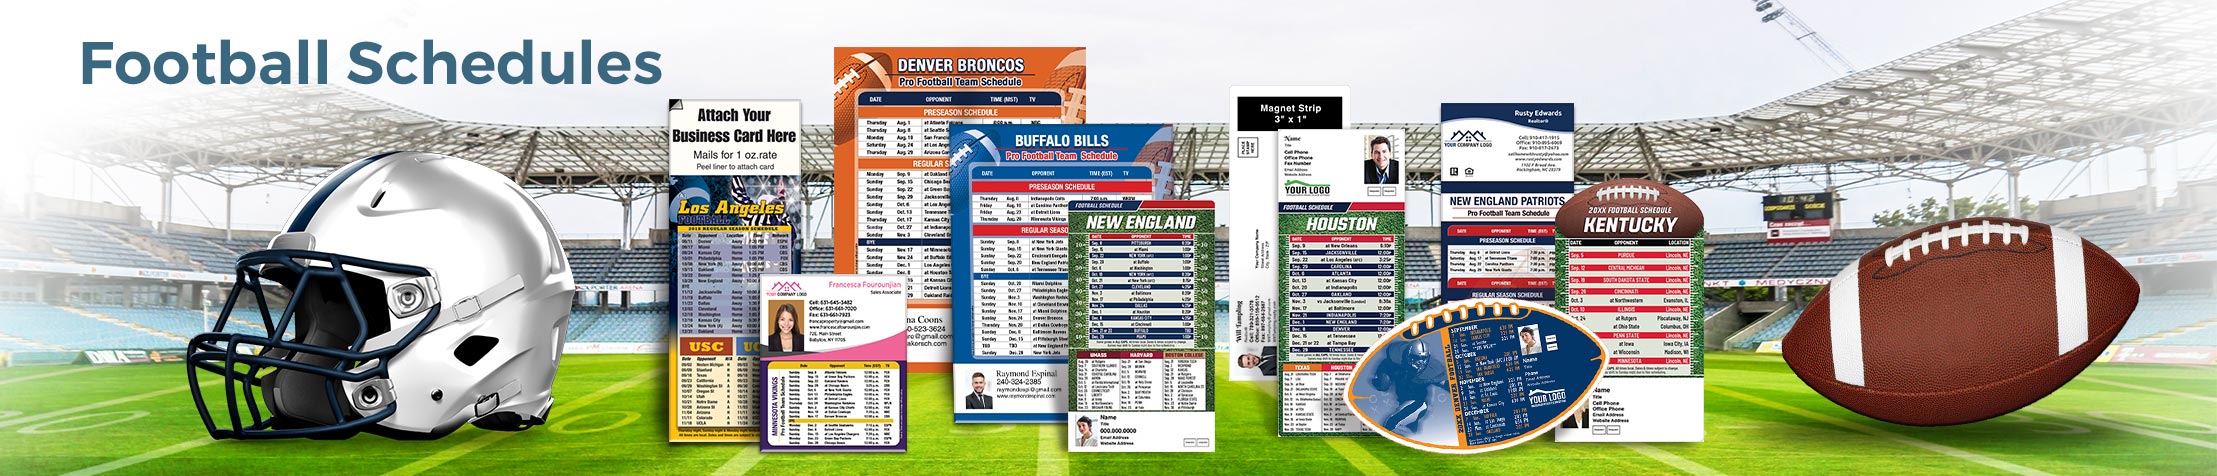 Century 21 Real Estate Football Schedules - C21  personalized football schedules | BestPrintBuy.com